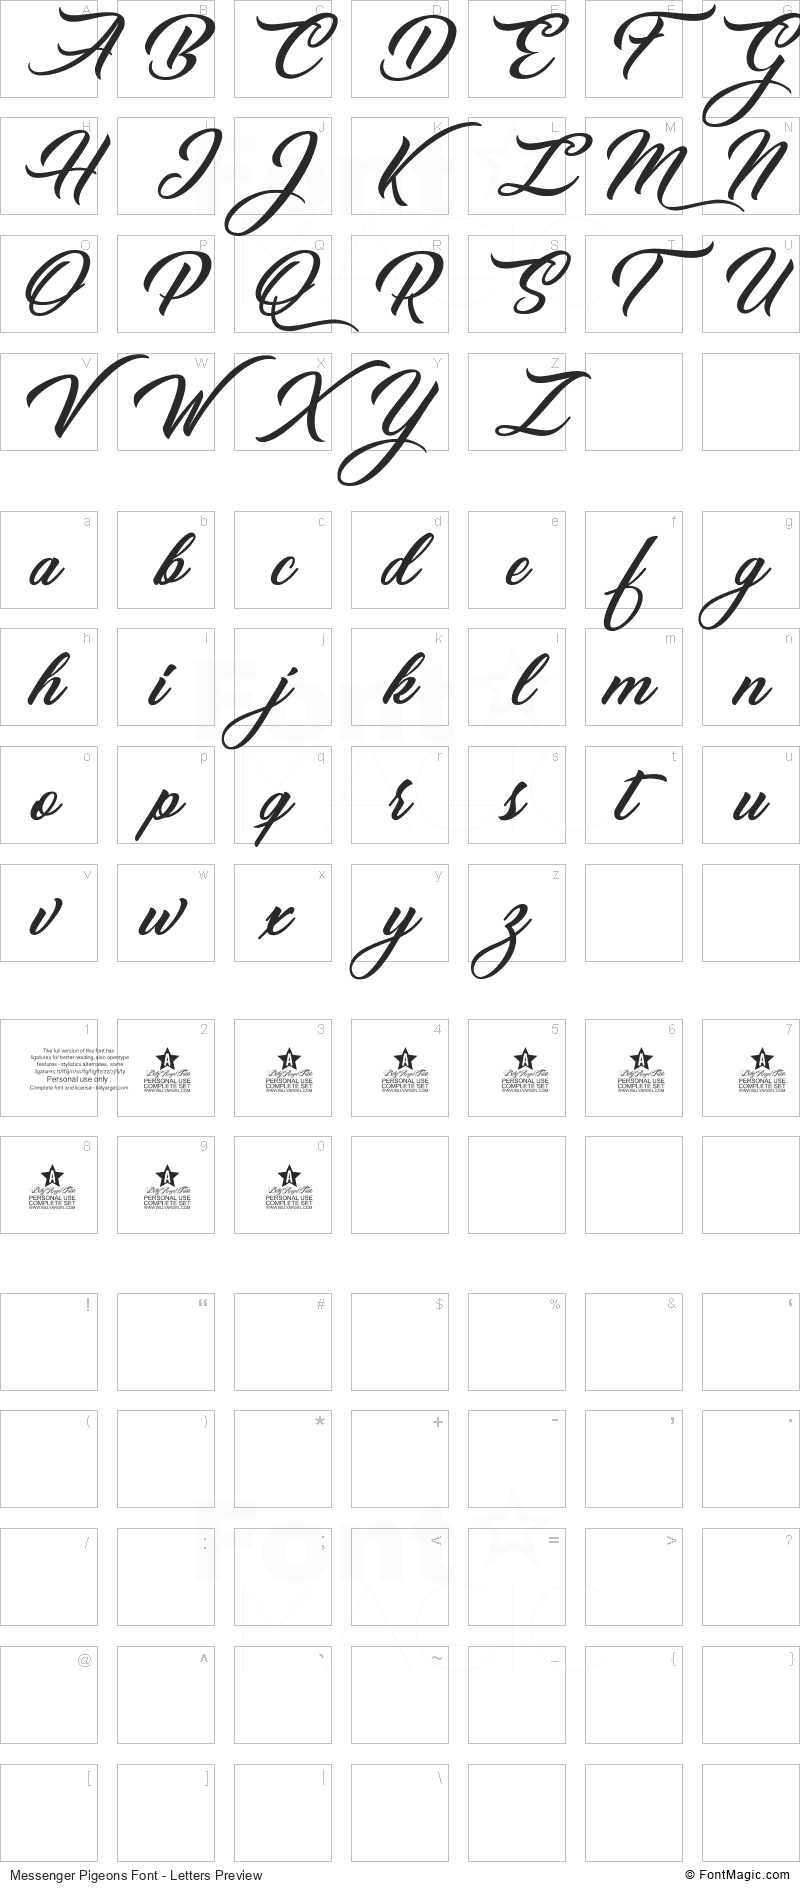 Messenger Pigeons Font - All Latters Preview Chart